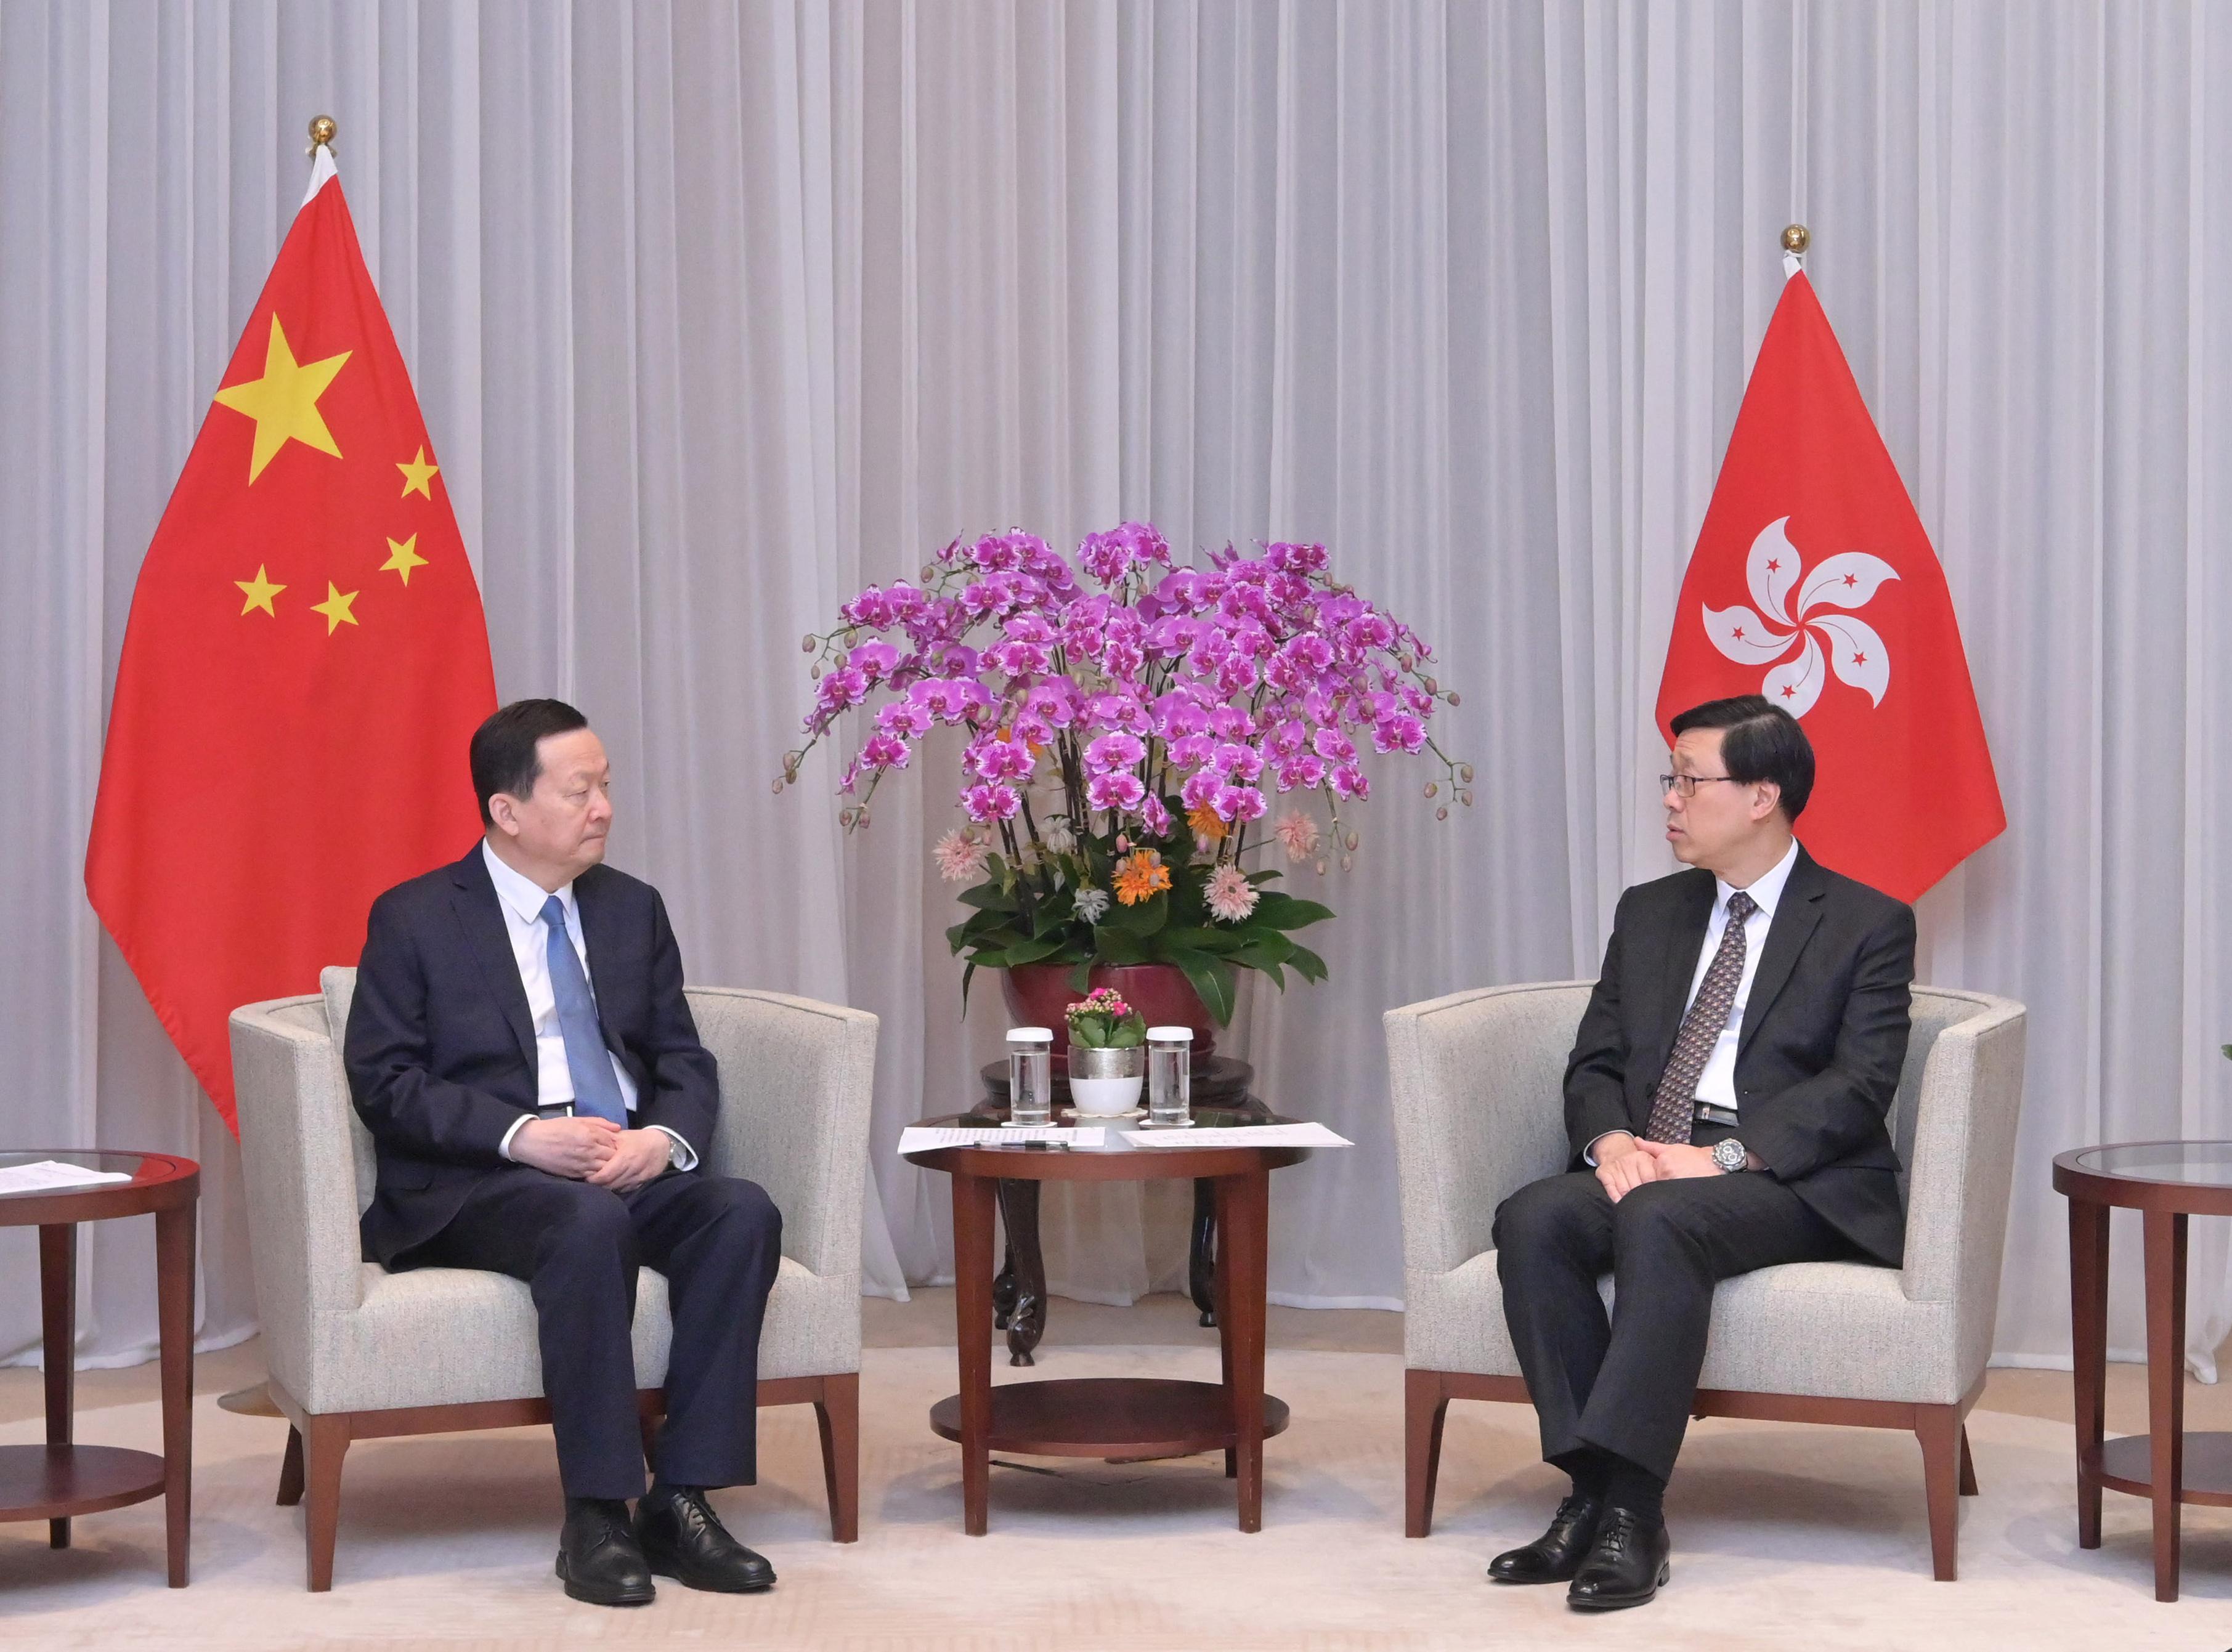 The Chief Executive, Mr John Lee (right), meets the Governor of Shandong Province, Mr Zhou Naixiang (left), today (May 29).